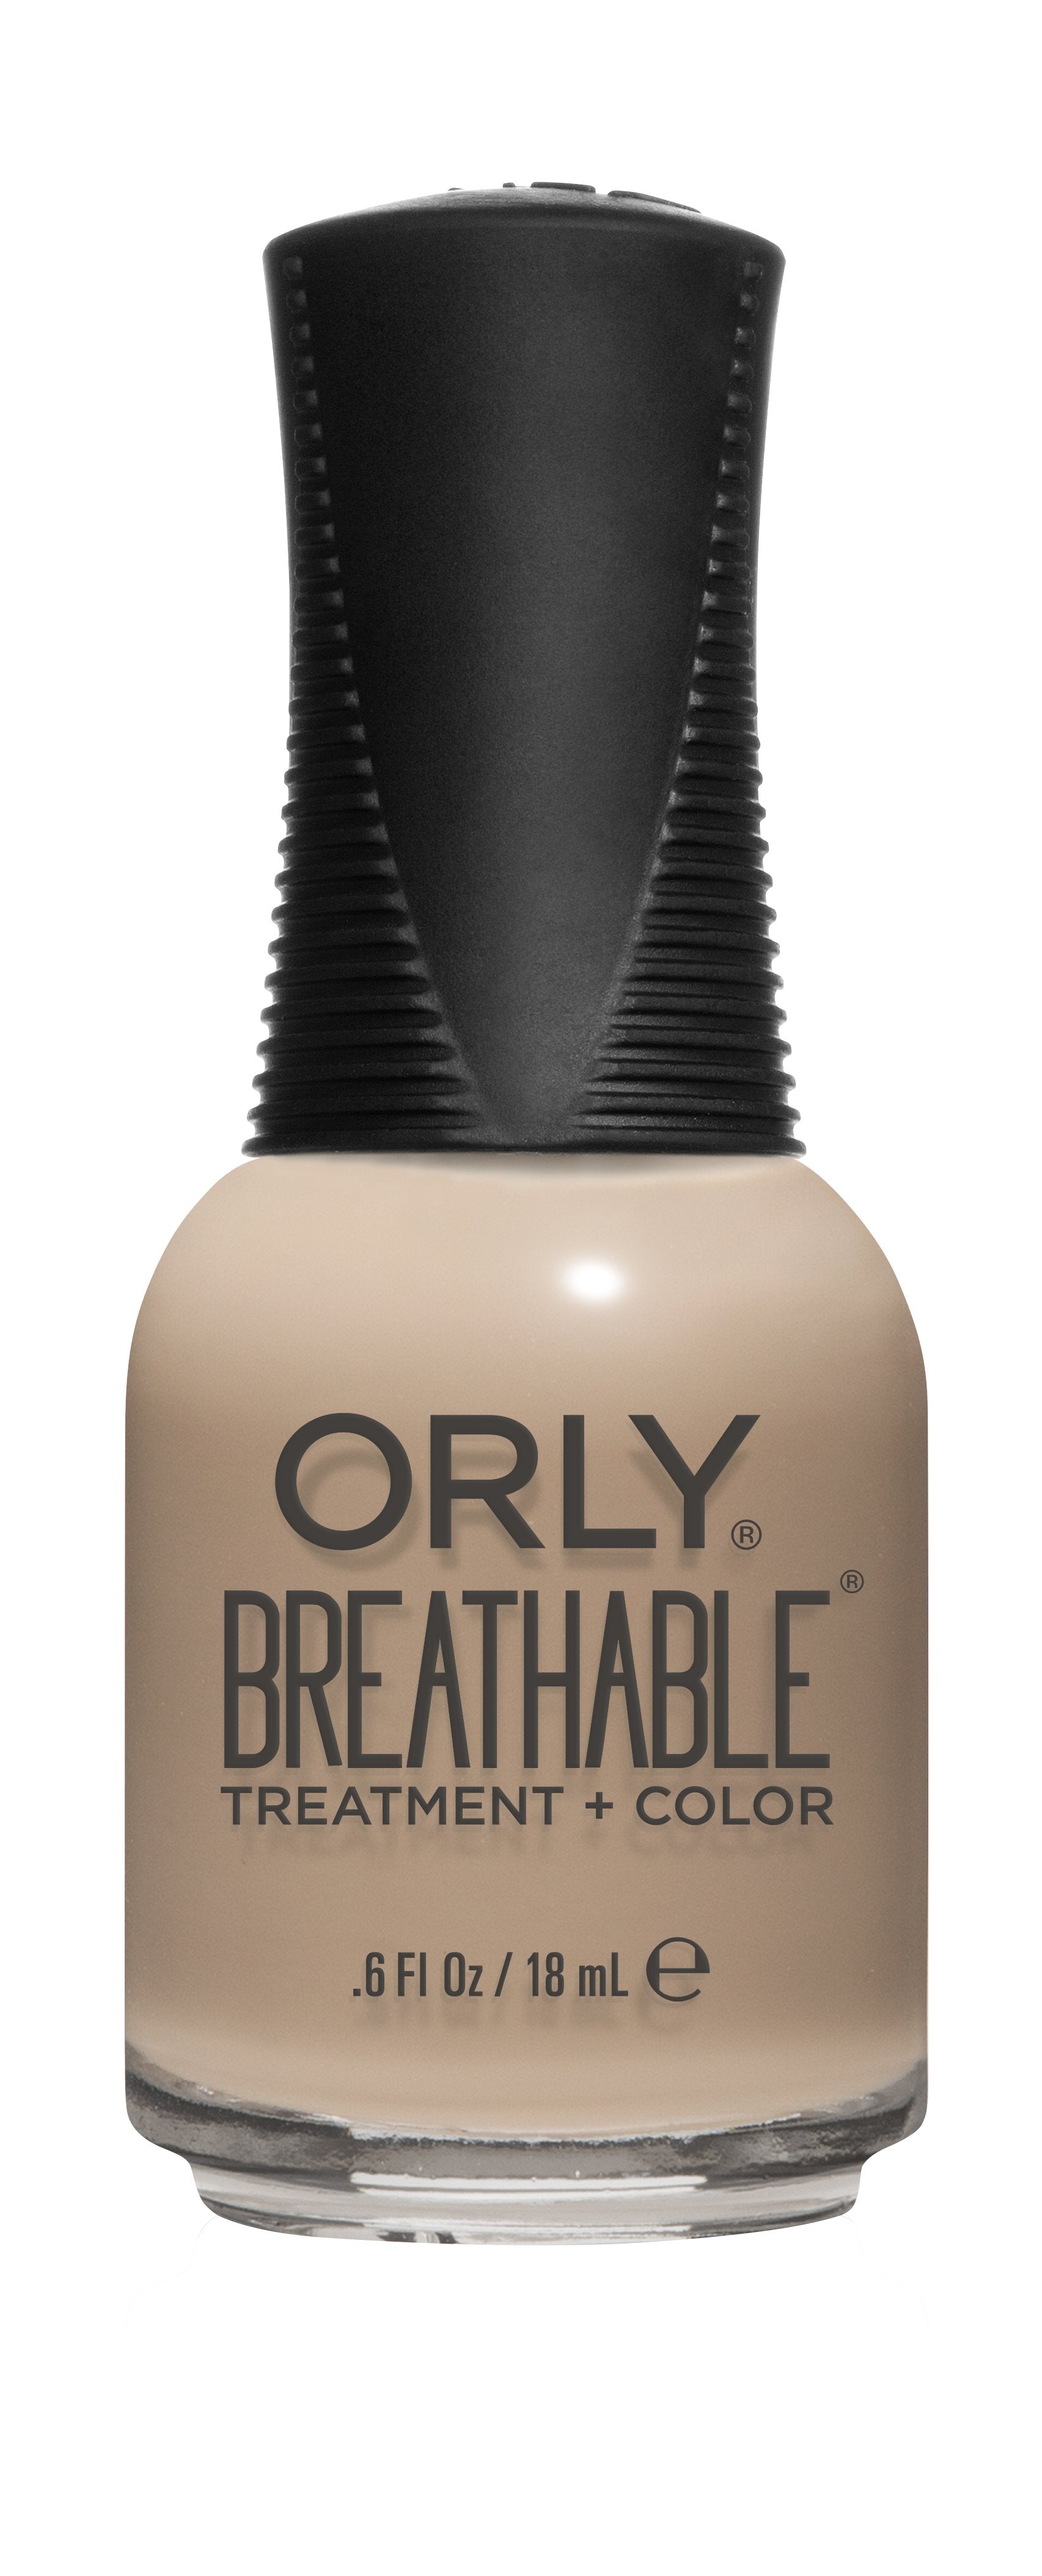 Bare Necessity - ORLY Breathable Treatment + Color